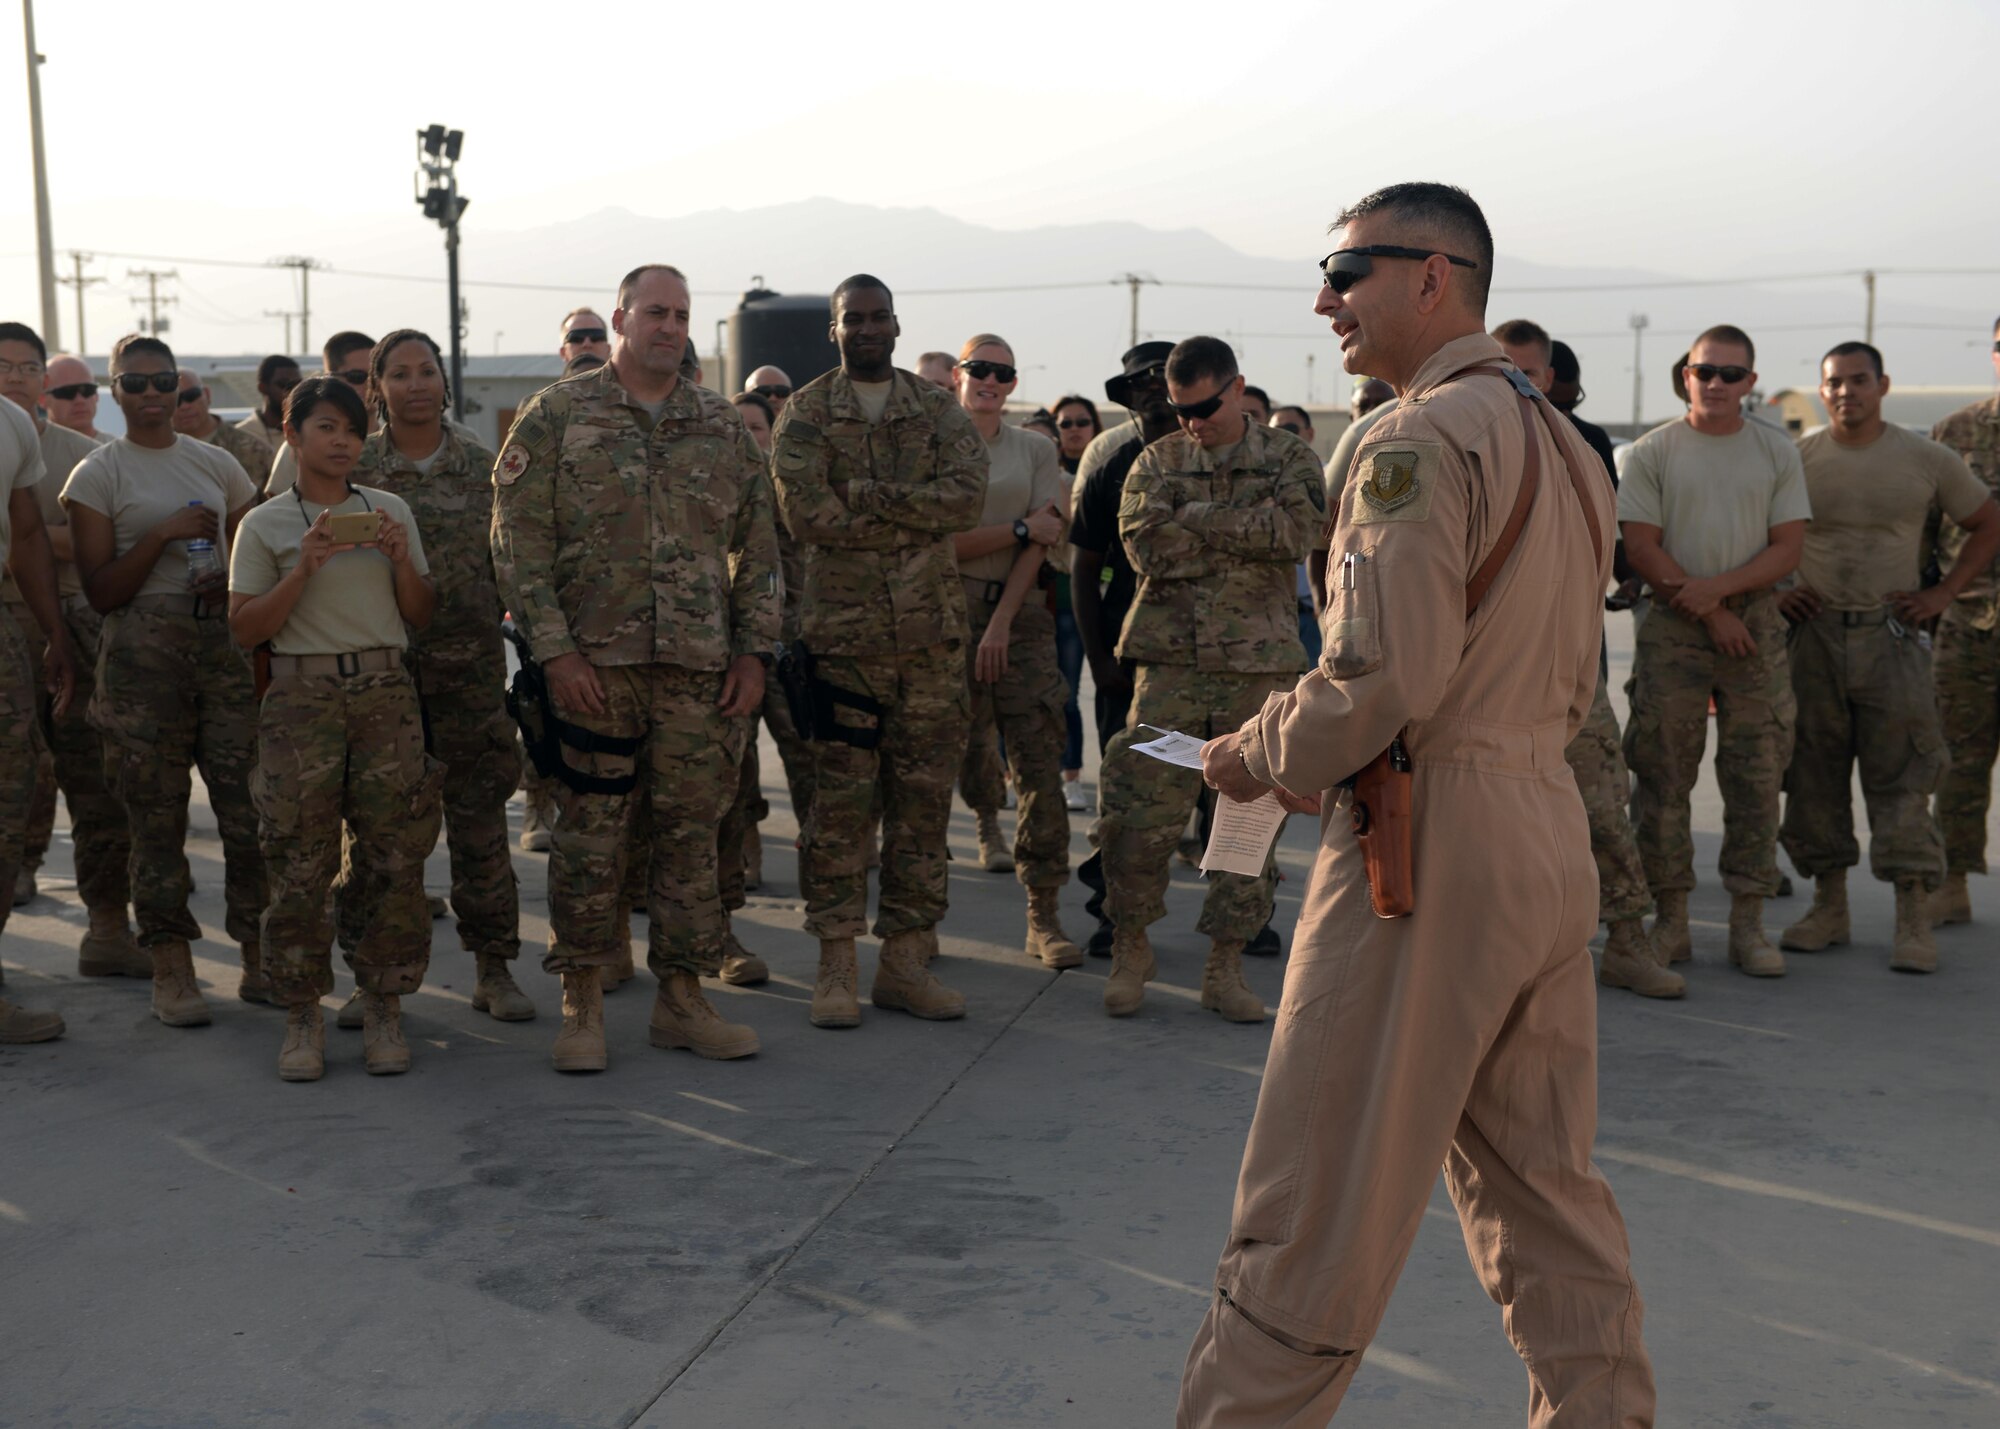 U.S. Air Force Brig. Gen. David Julazadeh, 455th Air Expeditionary Wing commander, gives a speech before a cake cutting during a block party held in honor of the Air Force’s 68th birthday Sept. 18, 2015, at Bagram Airfield, Afghanistan. The block party which was hosted by the Armed Forces Committed to Excellence council, the 455th Force Support Squadron and other private organizations featured games, food and an Air Force tradition cake cutting ceremony. (U.S. Air Force photo by Senior Airman Cierra Presentado/Released)